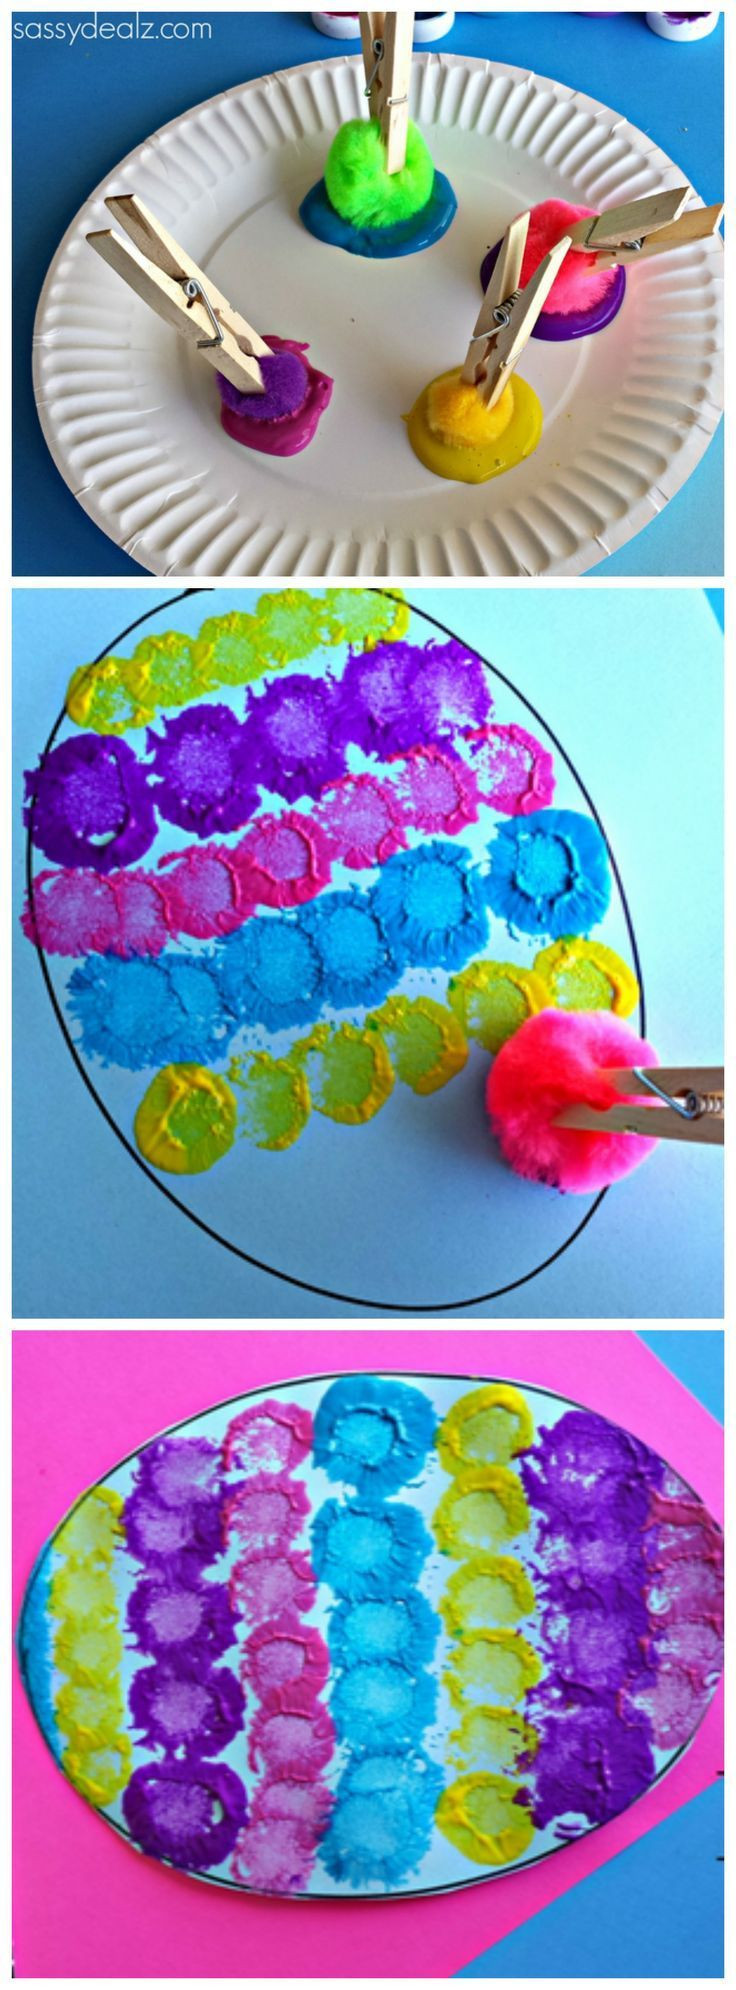 Spring Arts And Crafts For Toddlers
 6 Amazing craft activities for kids